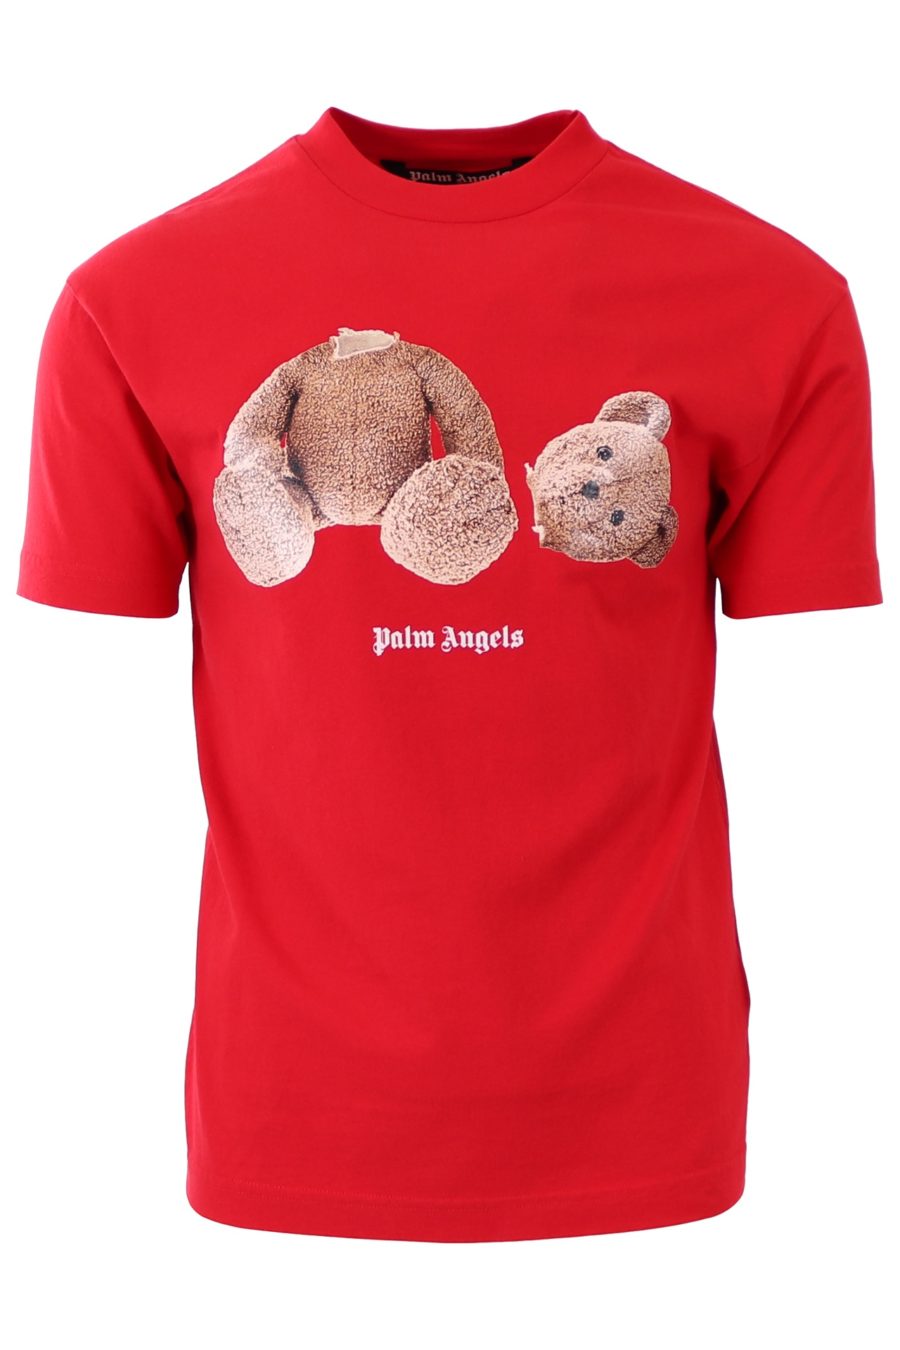 T-shirt Palm Angels rouge avec ours - 4516453a8b99acee0b870798849aa7ecbbd20f1f